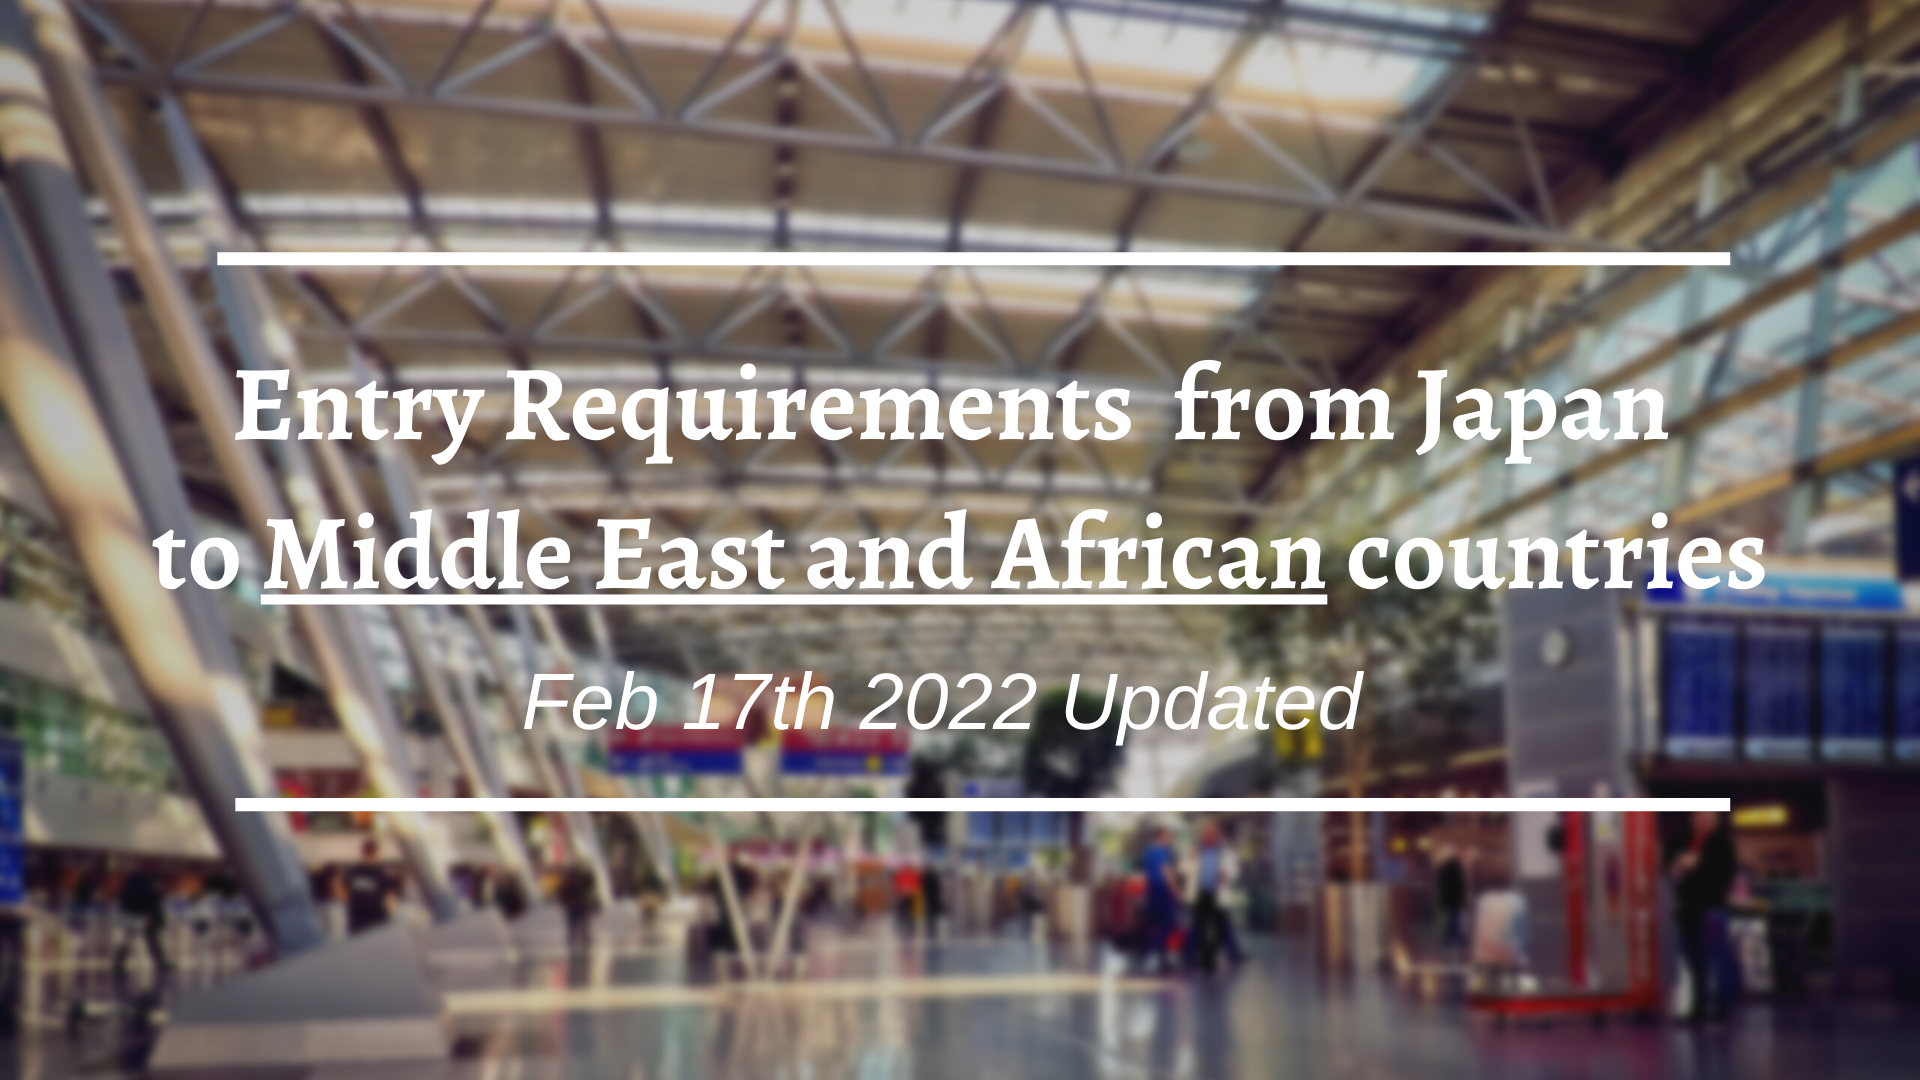 Entry Requirements from Japan to Middle East and African countries